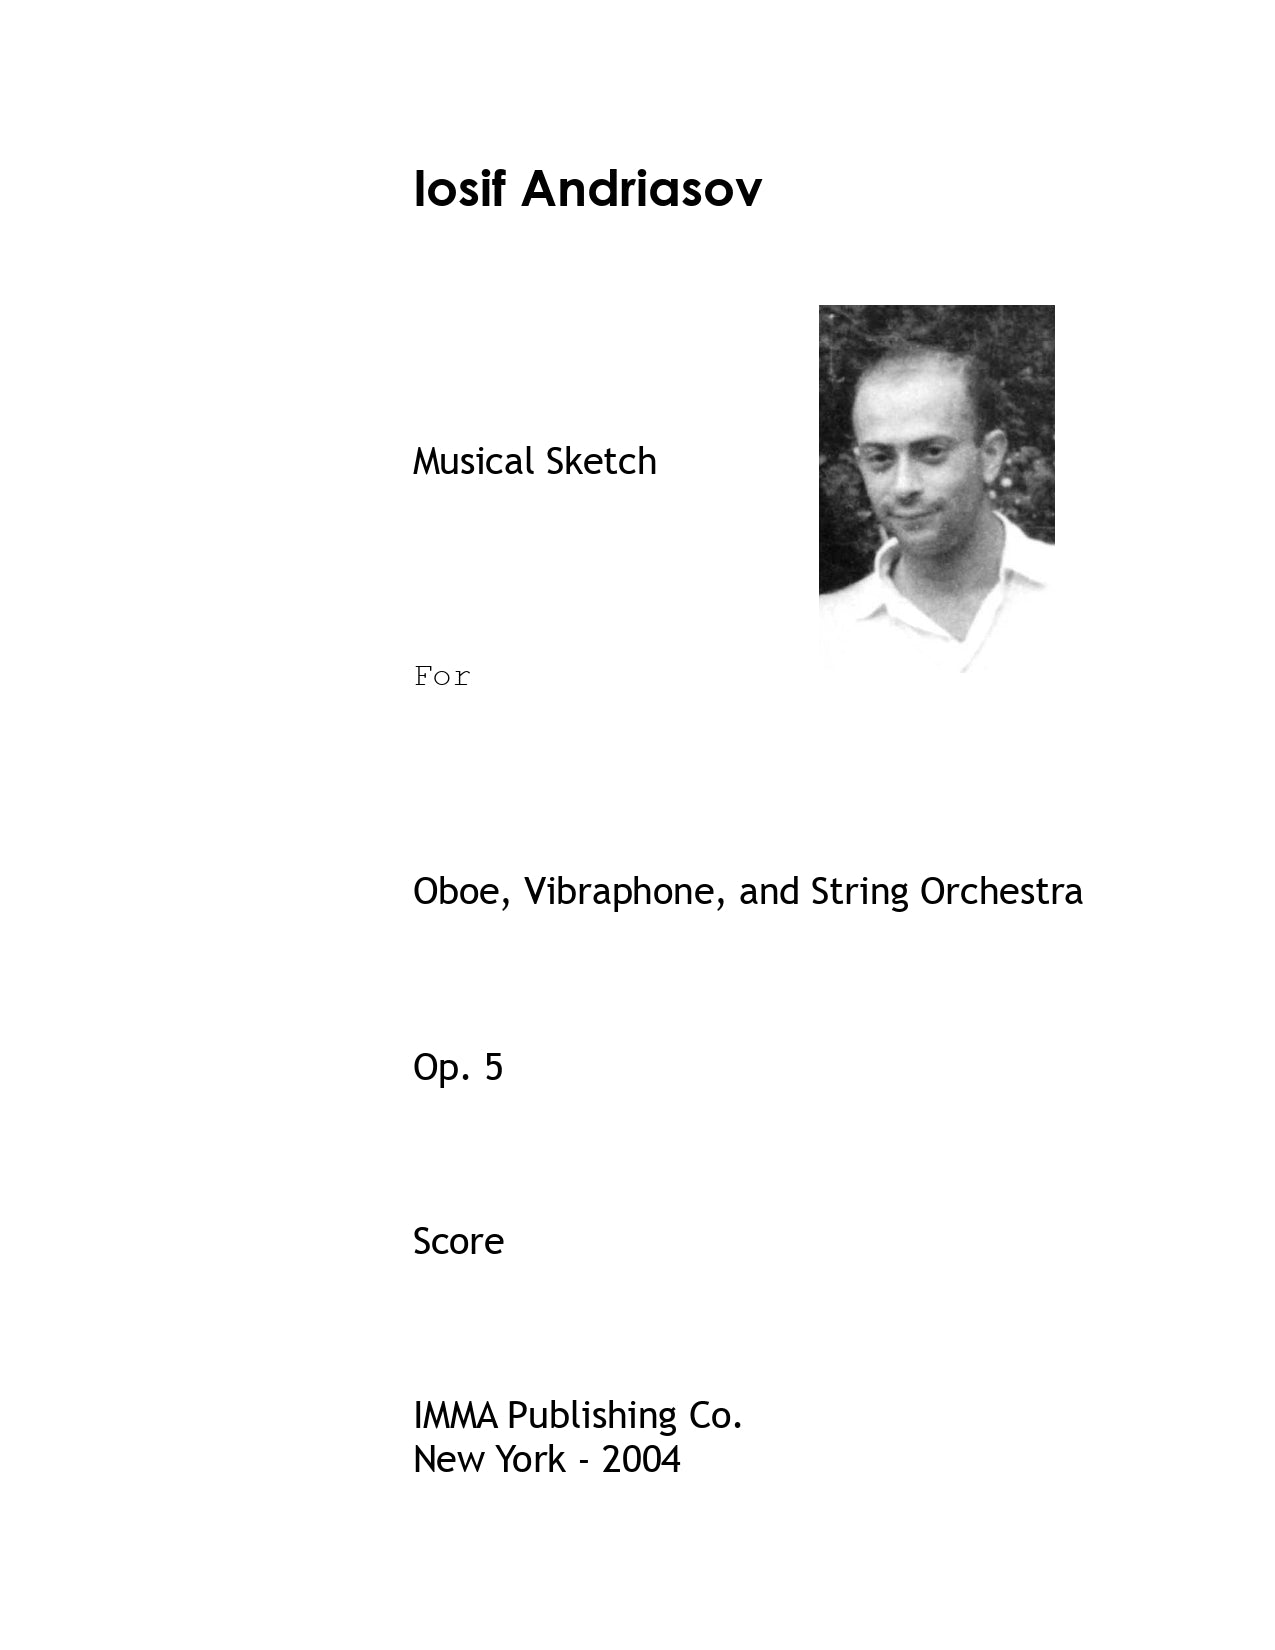 016. Iosif Andriasov: Musical Sketch, Op. 5 for Oboe, Vibraphone, and String Orchestra.